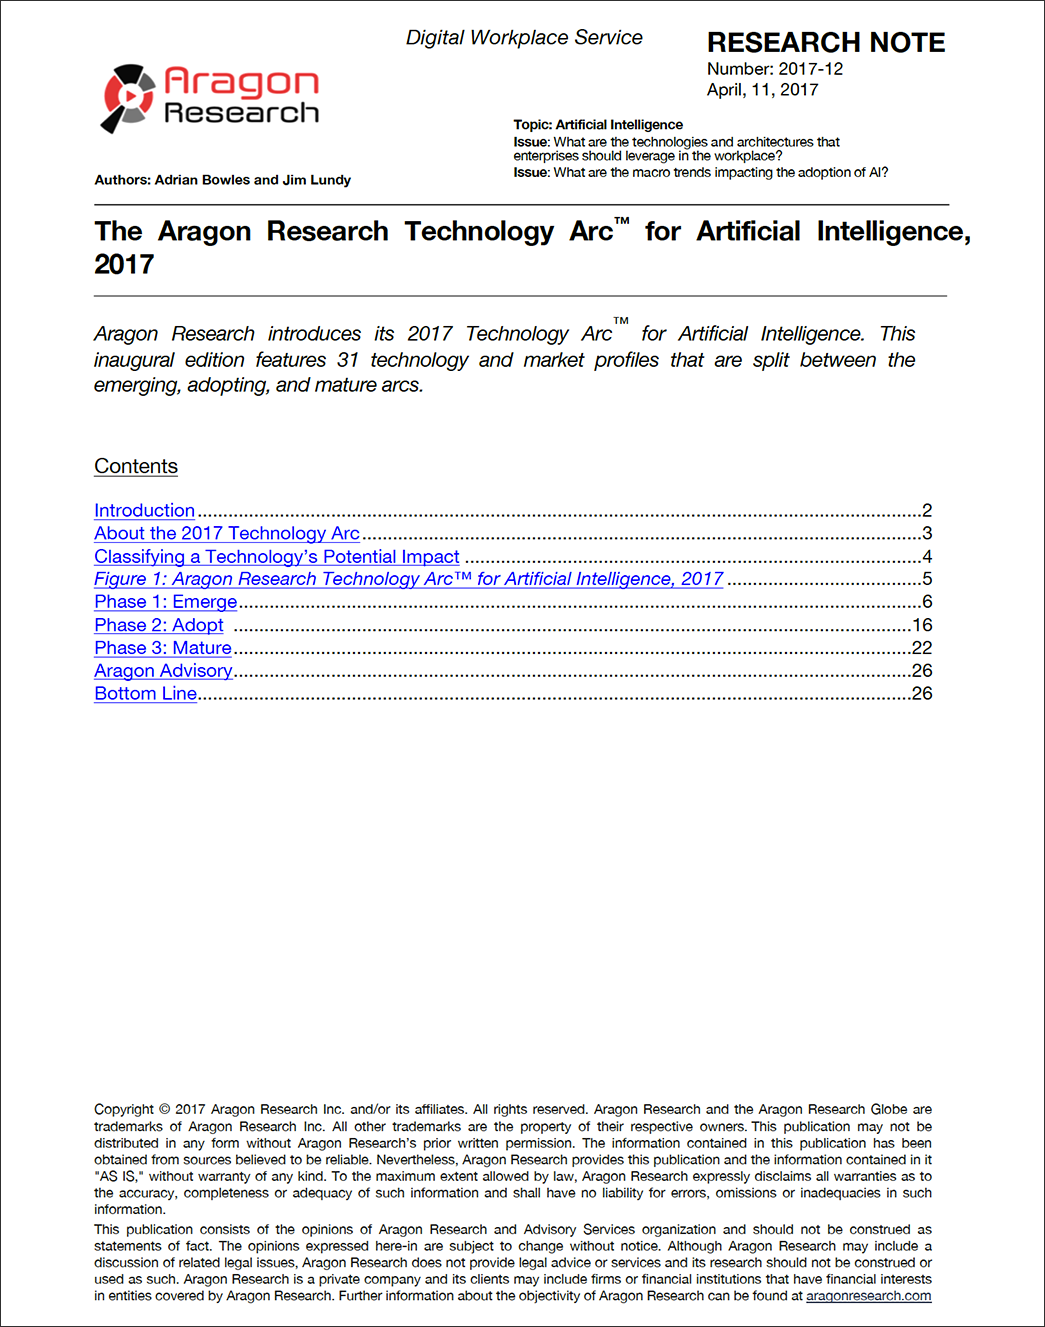 The Aragon Research Technology Arc™ for Artificial Intelligence, 2017